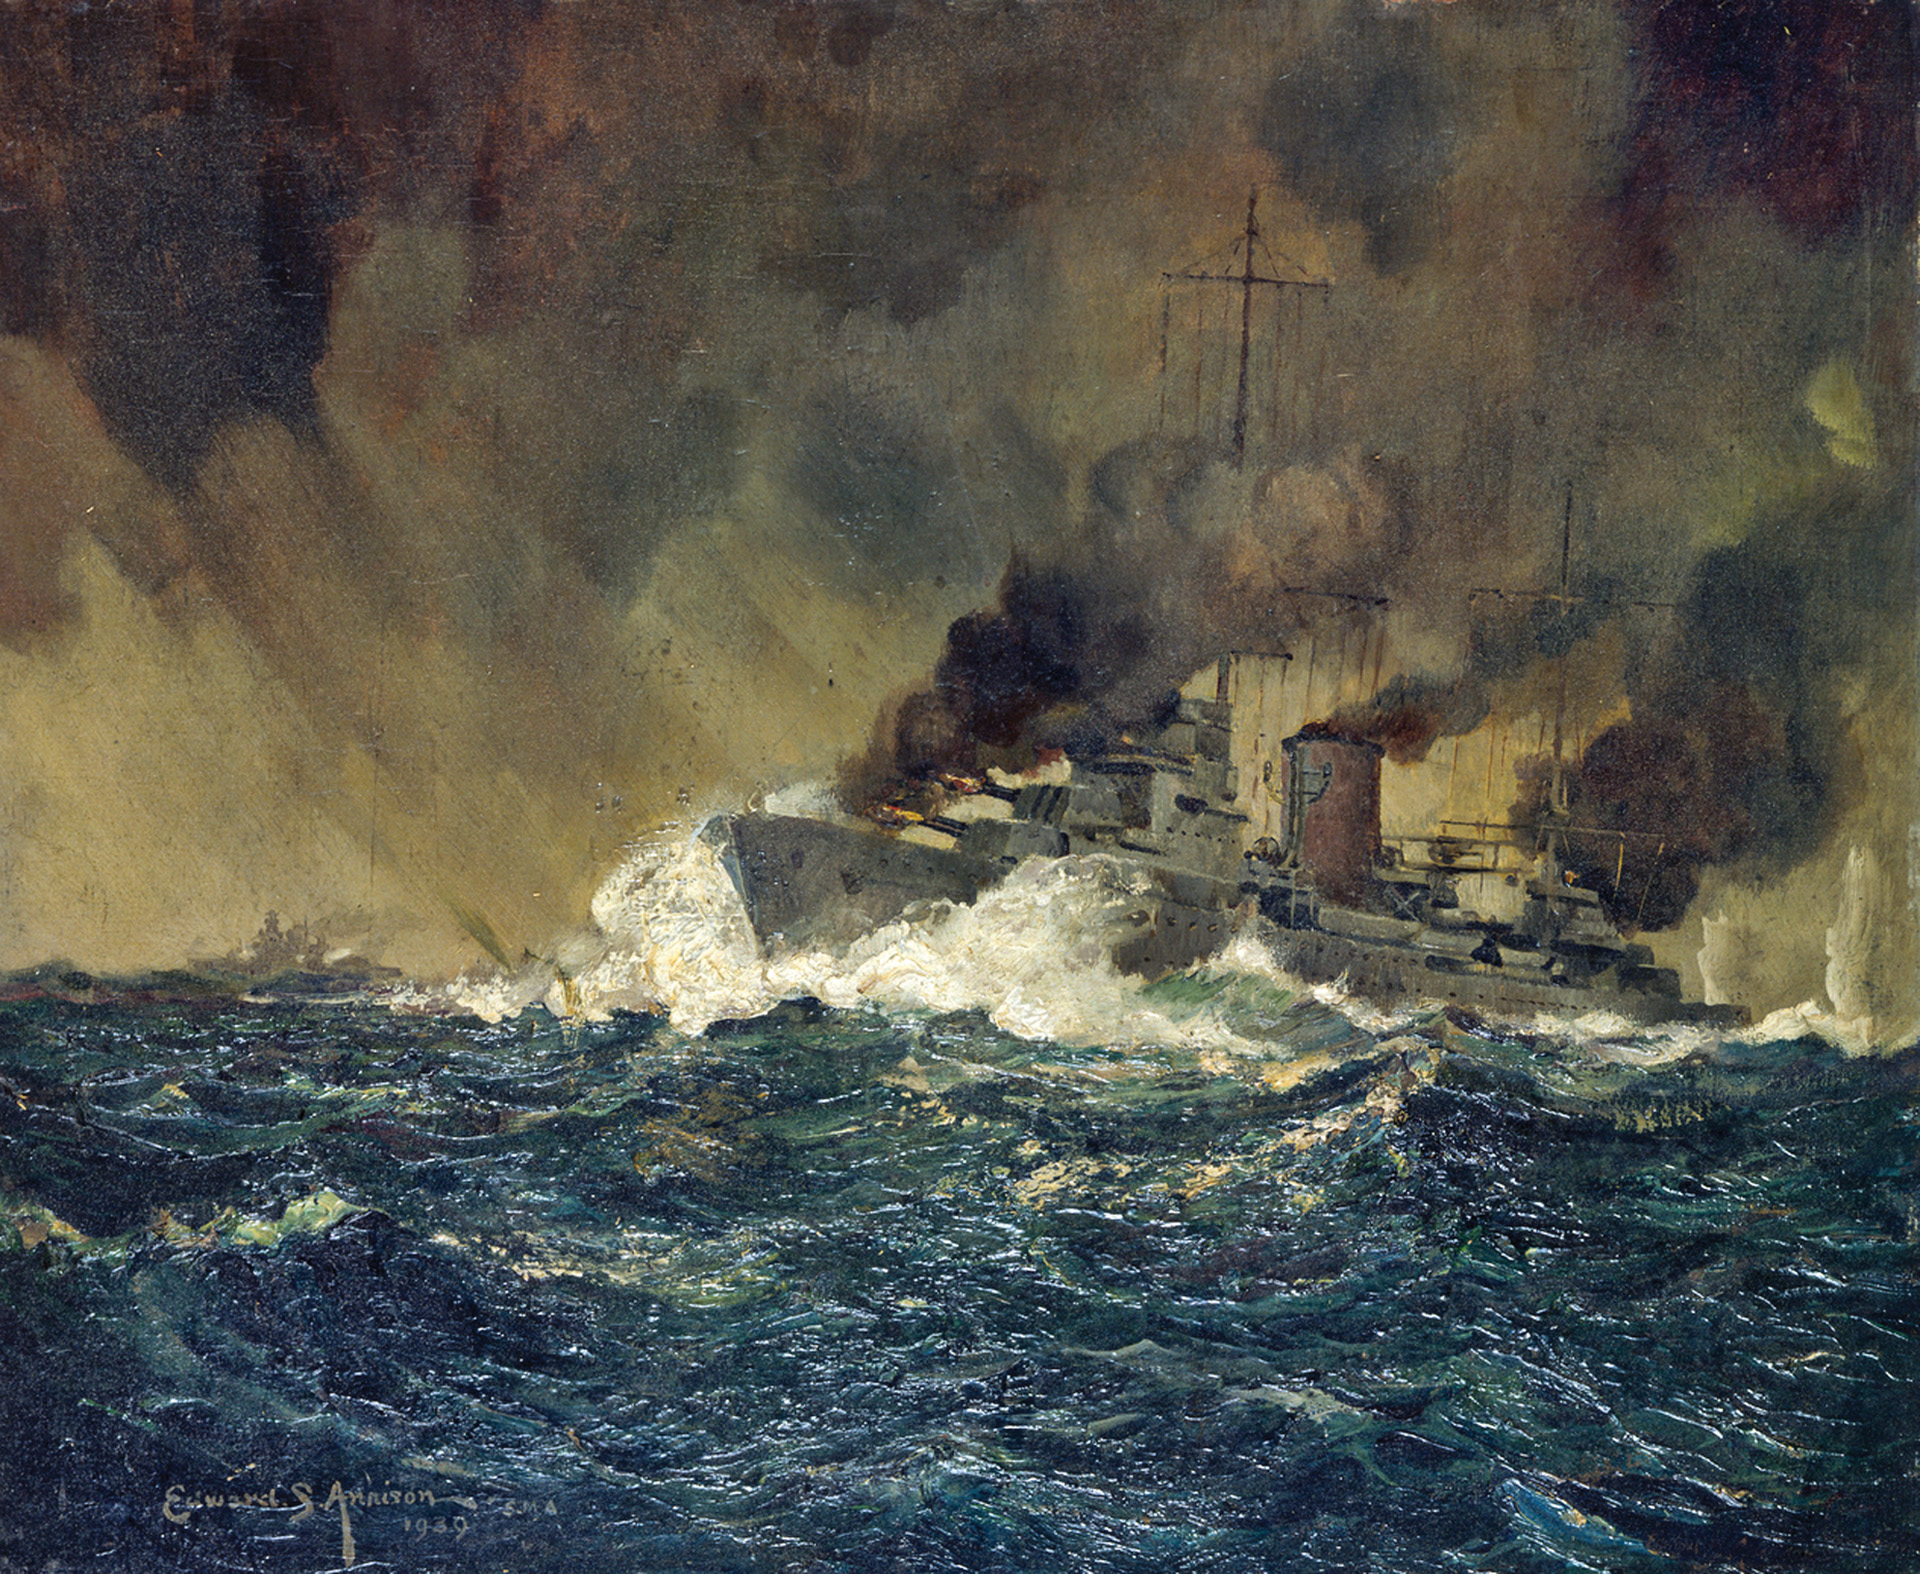 The cruiser HMNZS Achilles, manned by its crew of New Zealanders, opens fire on the German pocket battleship Graf Spee during the early moments of the Battle of the River Plate. The British naval squadron, which also included the British cruisers Ajax and Exeter, drove the German raider to seek safety in the harbor of Montevideo, Uruguay.